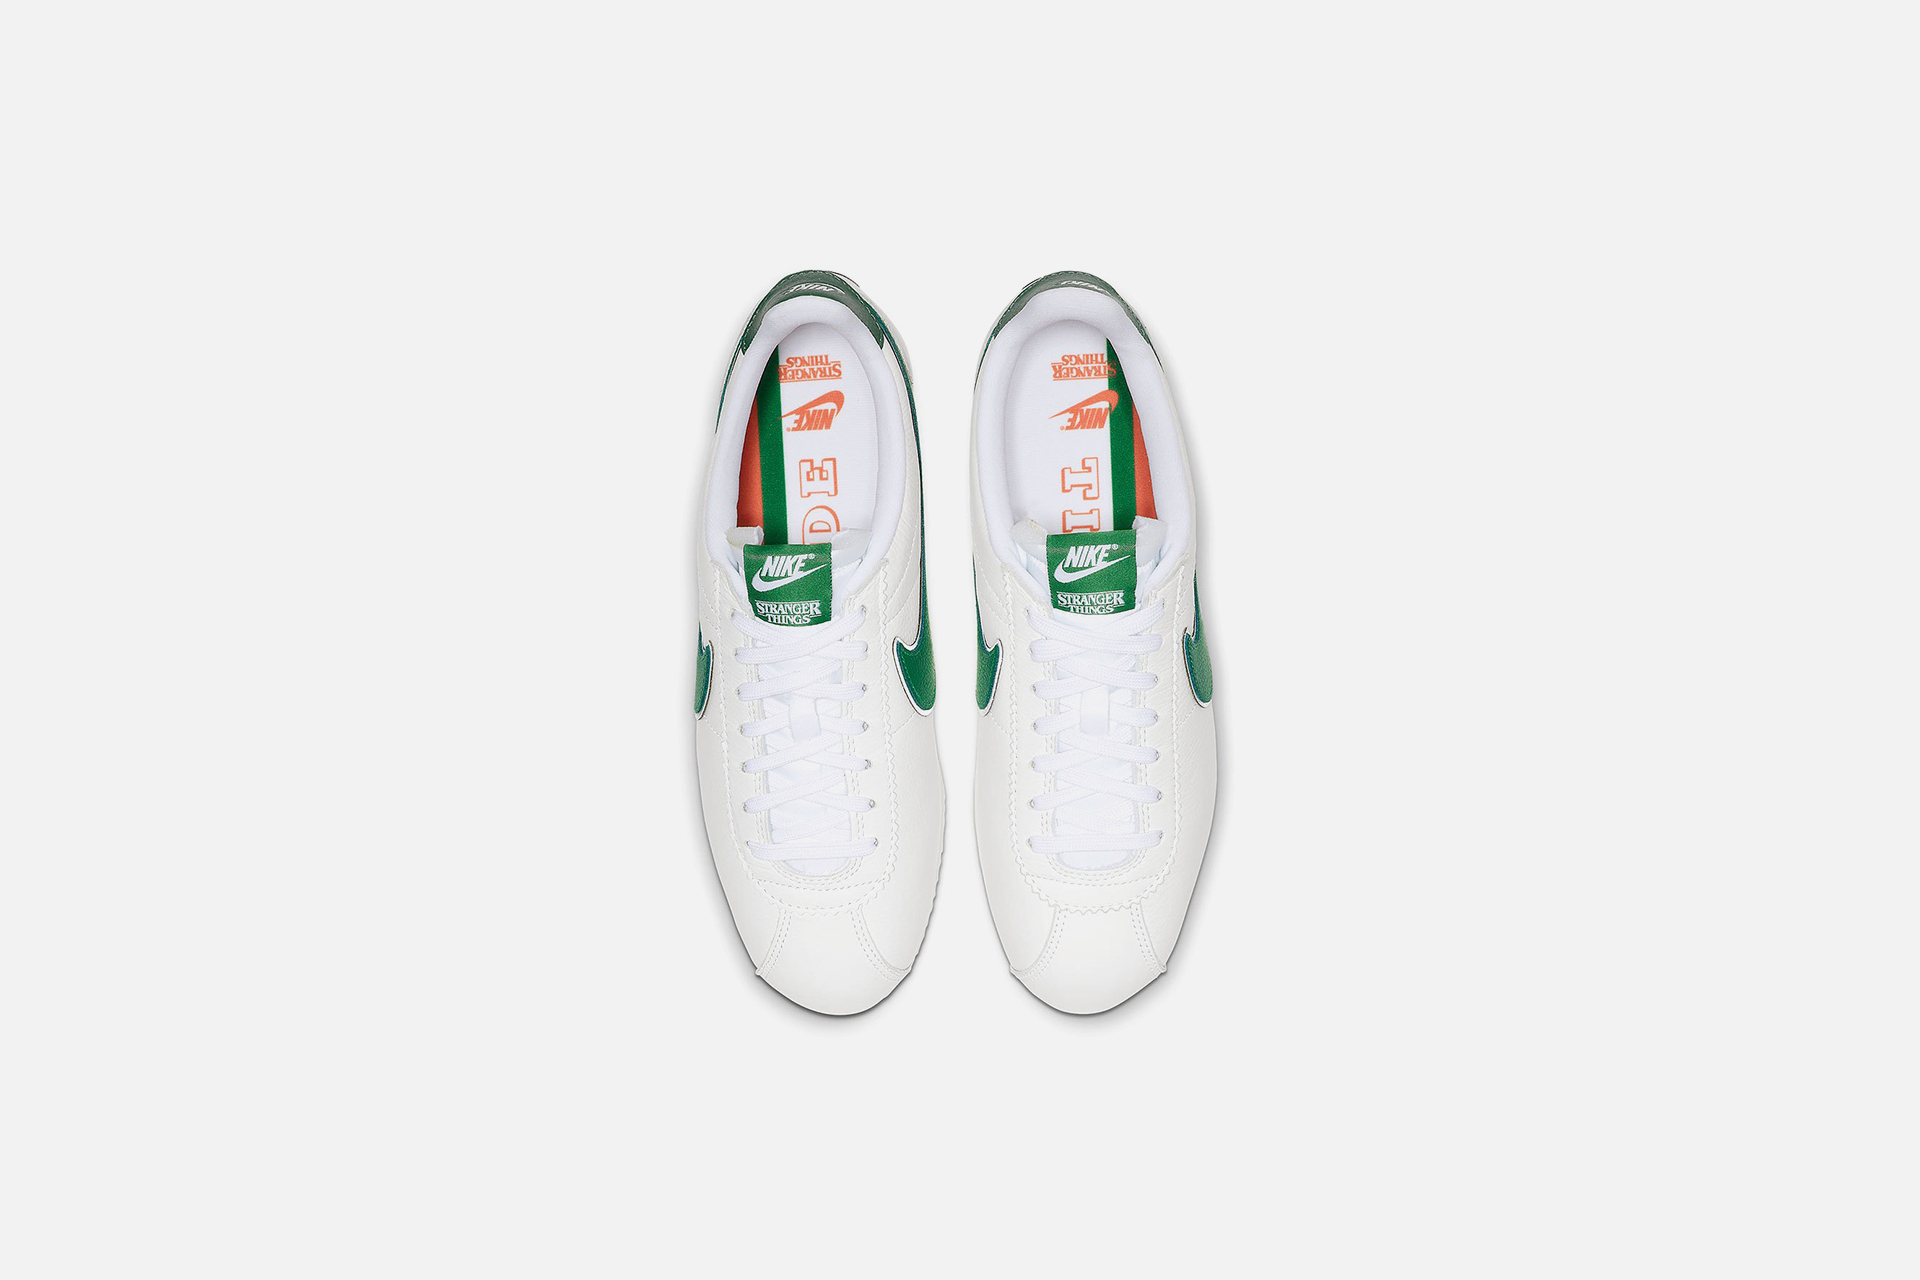 Hand Painted Limited Run Nike Cortez X Hawkins High Sneakers. 